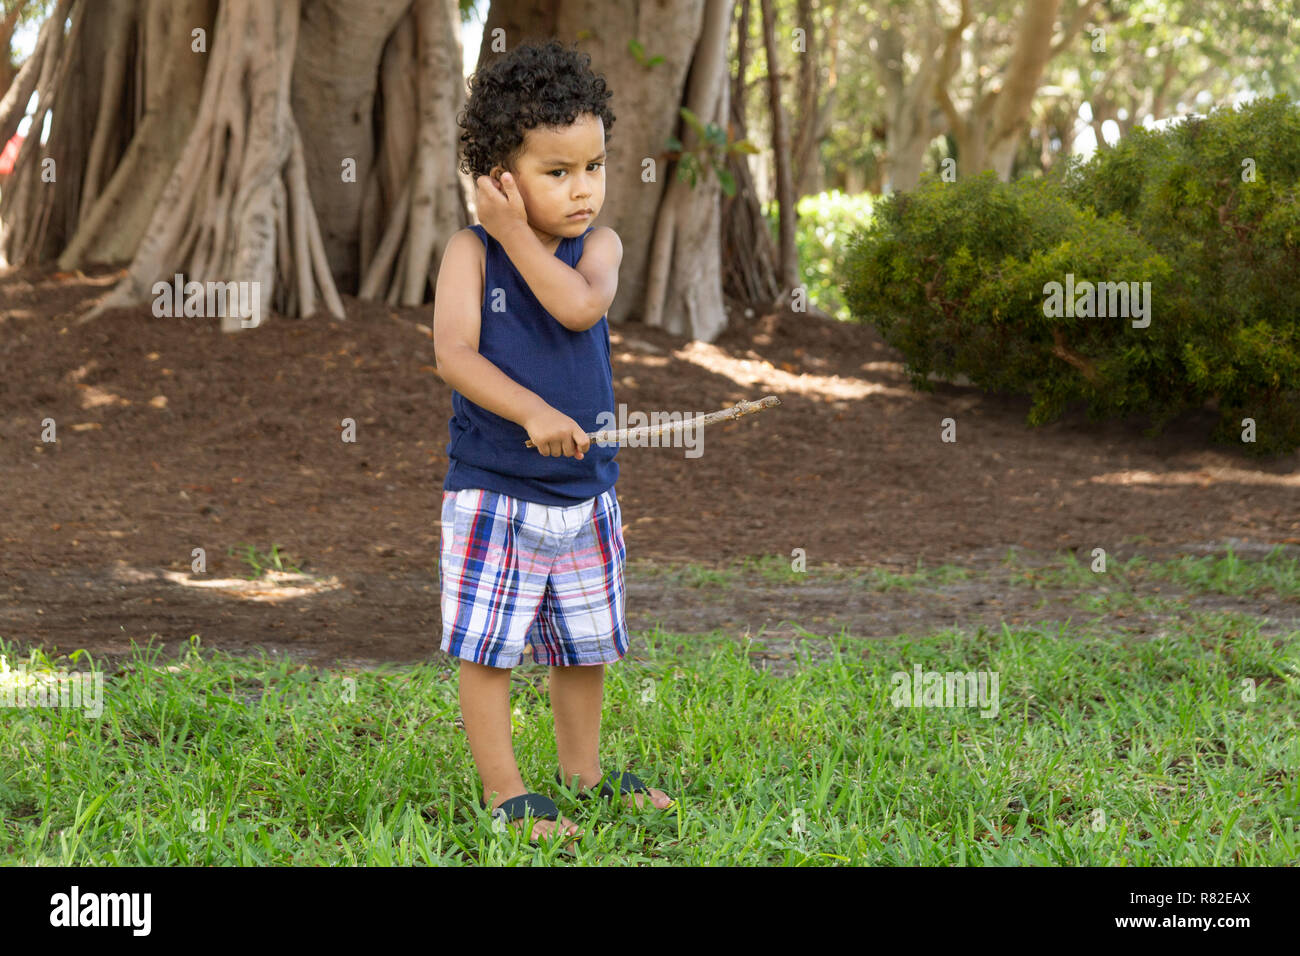 A Hispanic boy with a serious staring look scratches his ear while holding a stick at the community park. Stock Photo